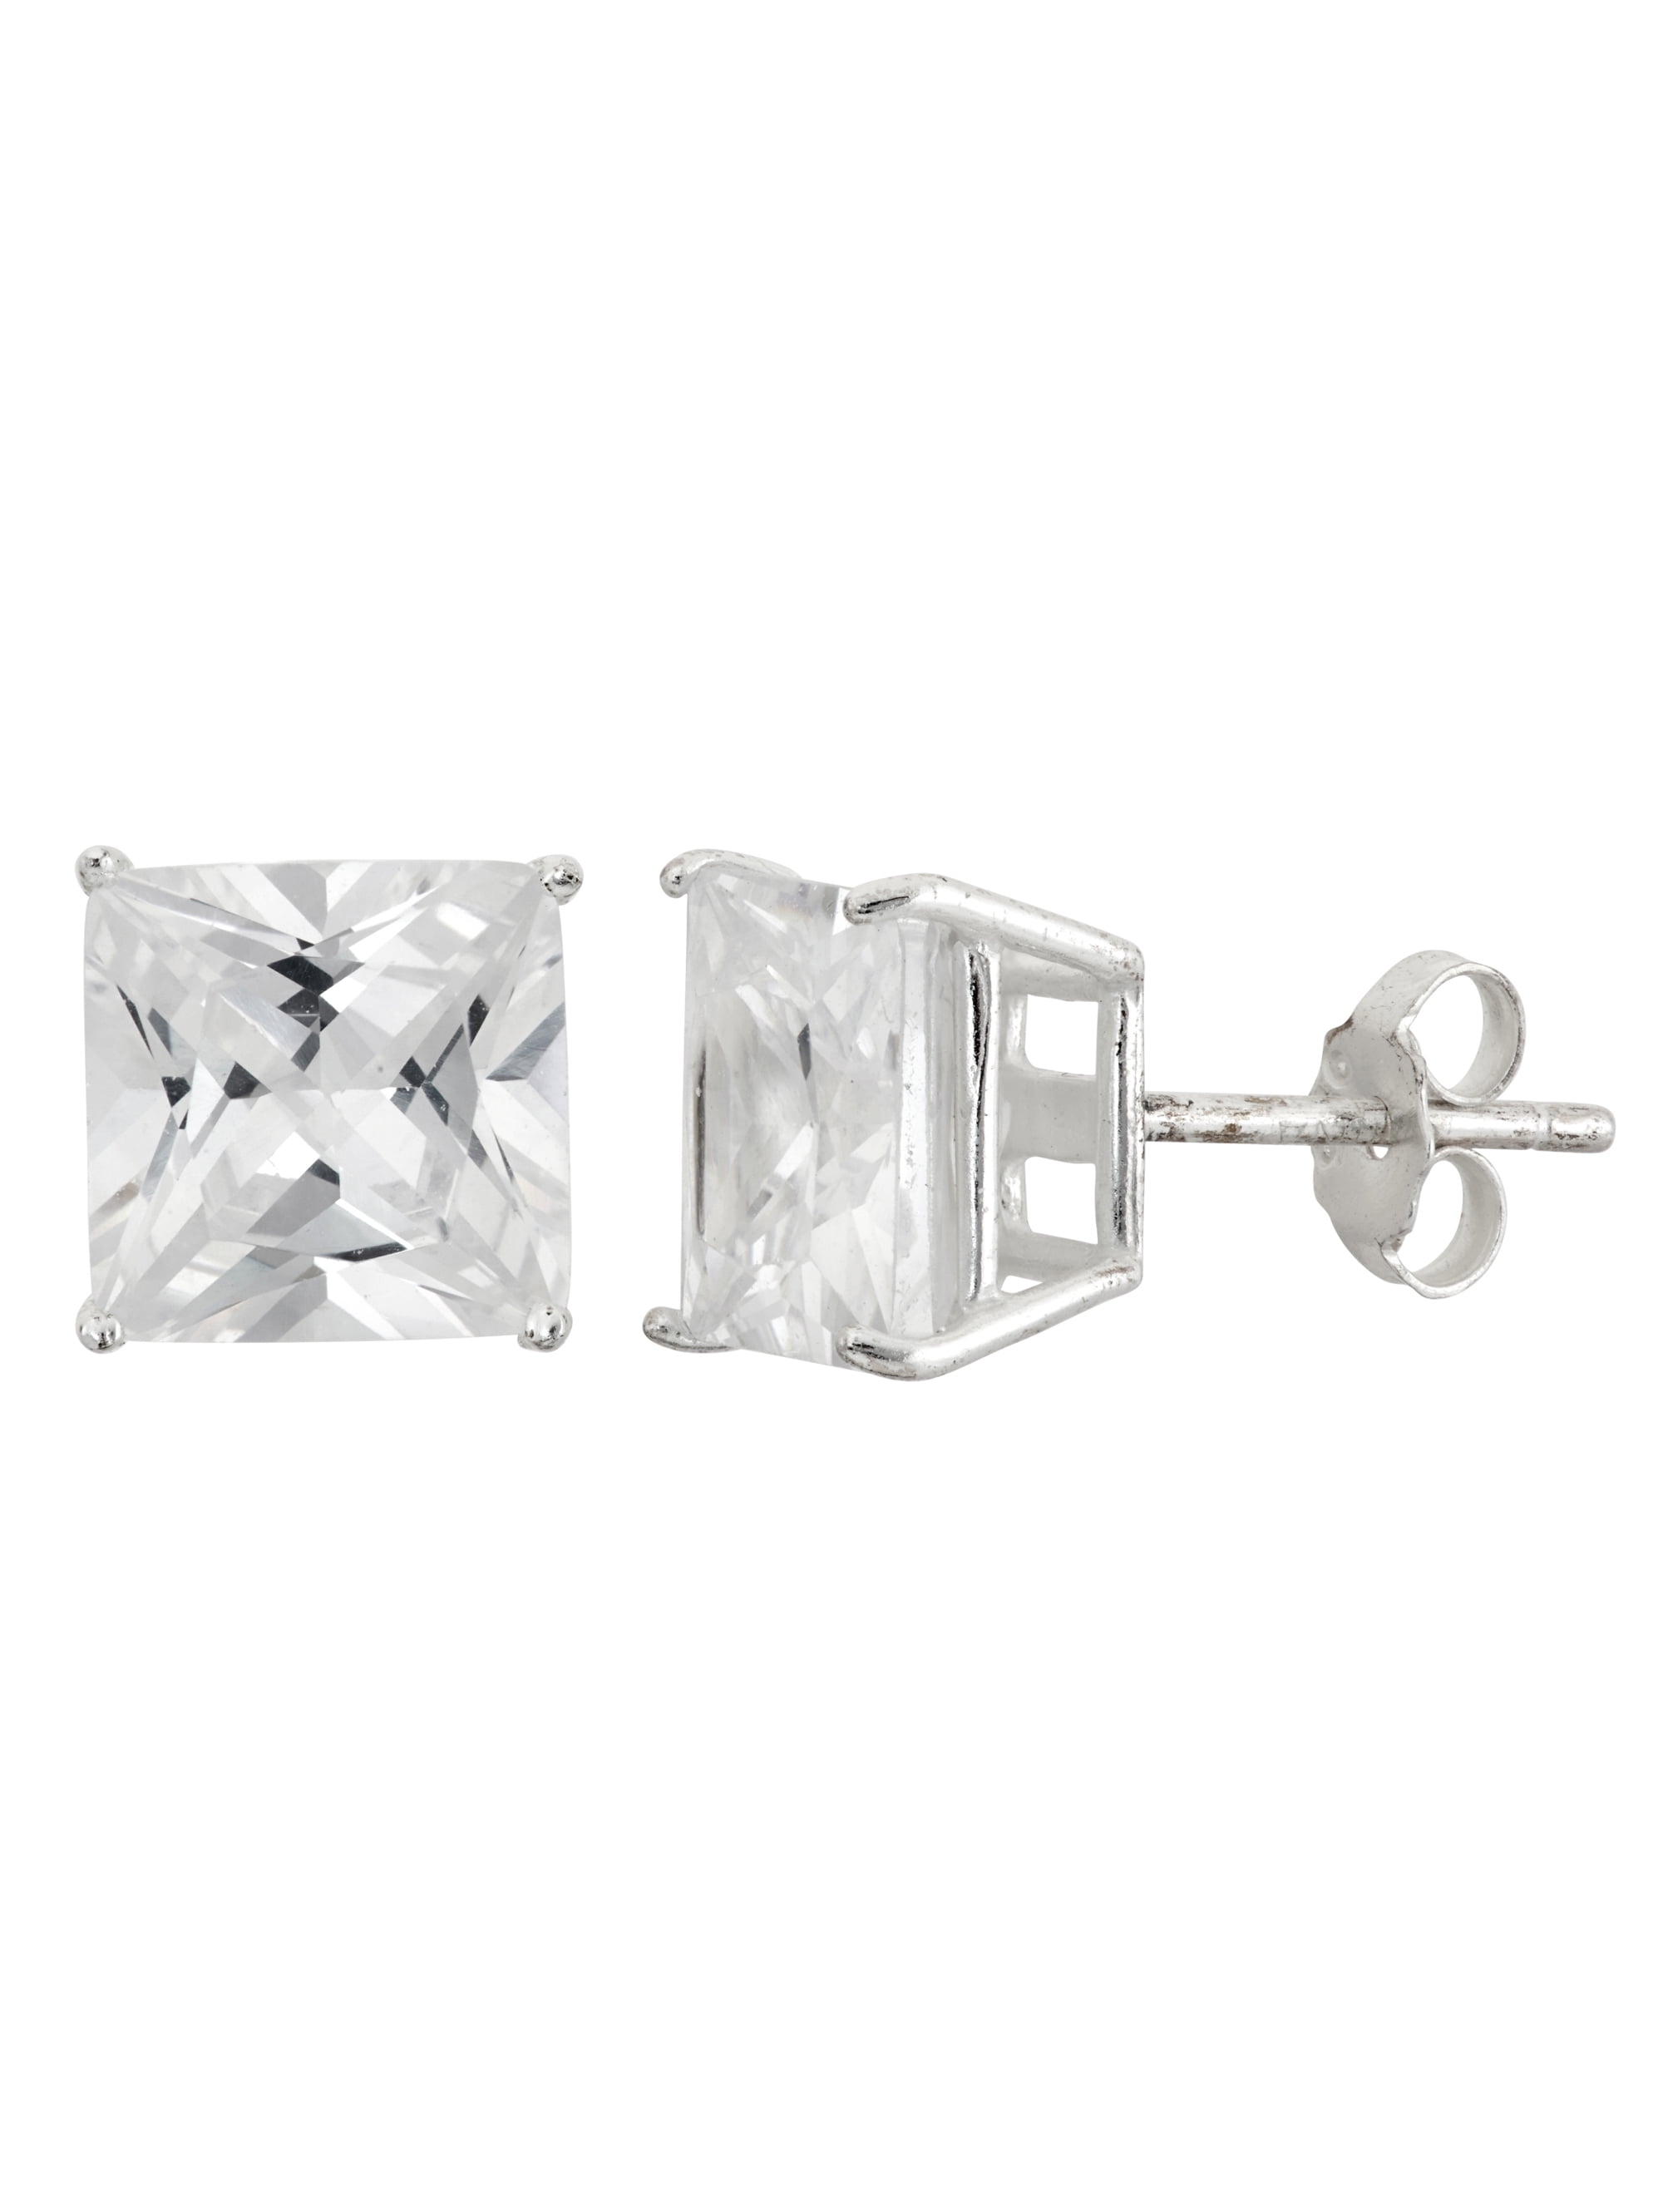 Forever New - White CZ Sterling Silver 8mm Square Stud Earrings